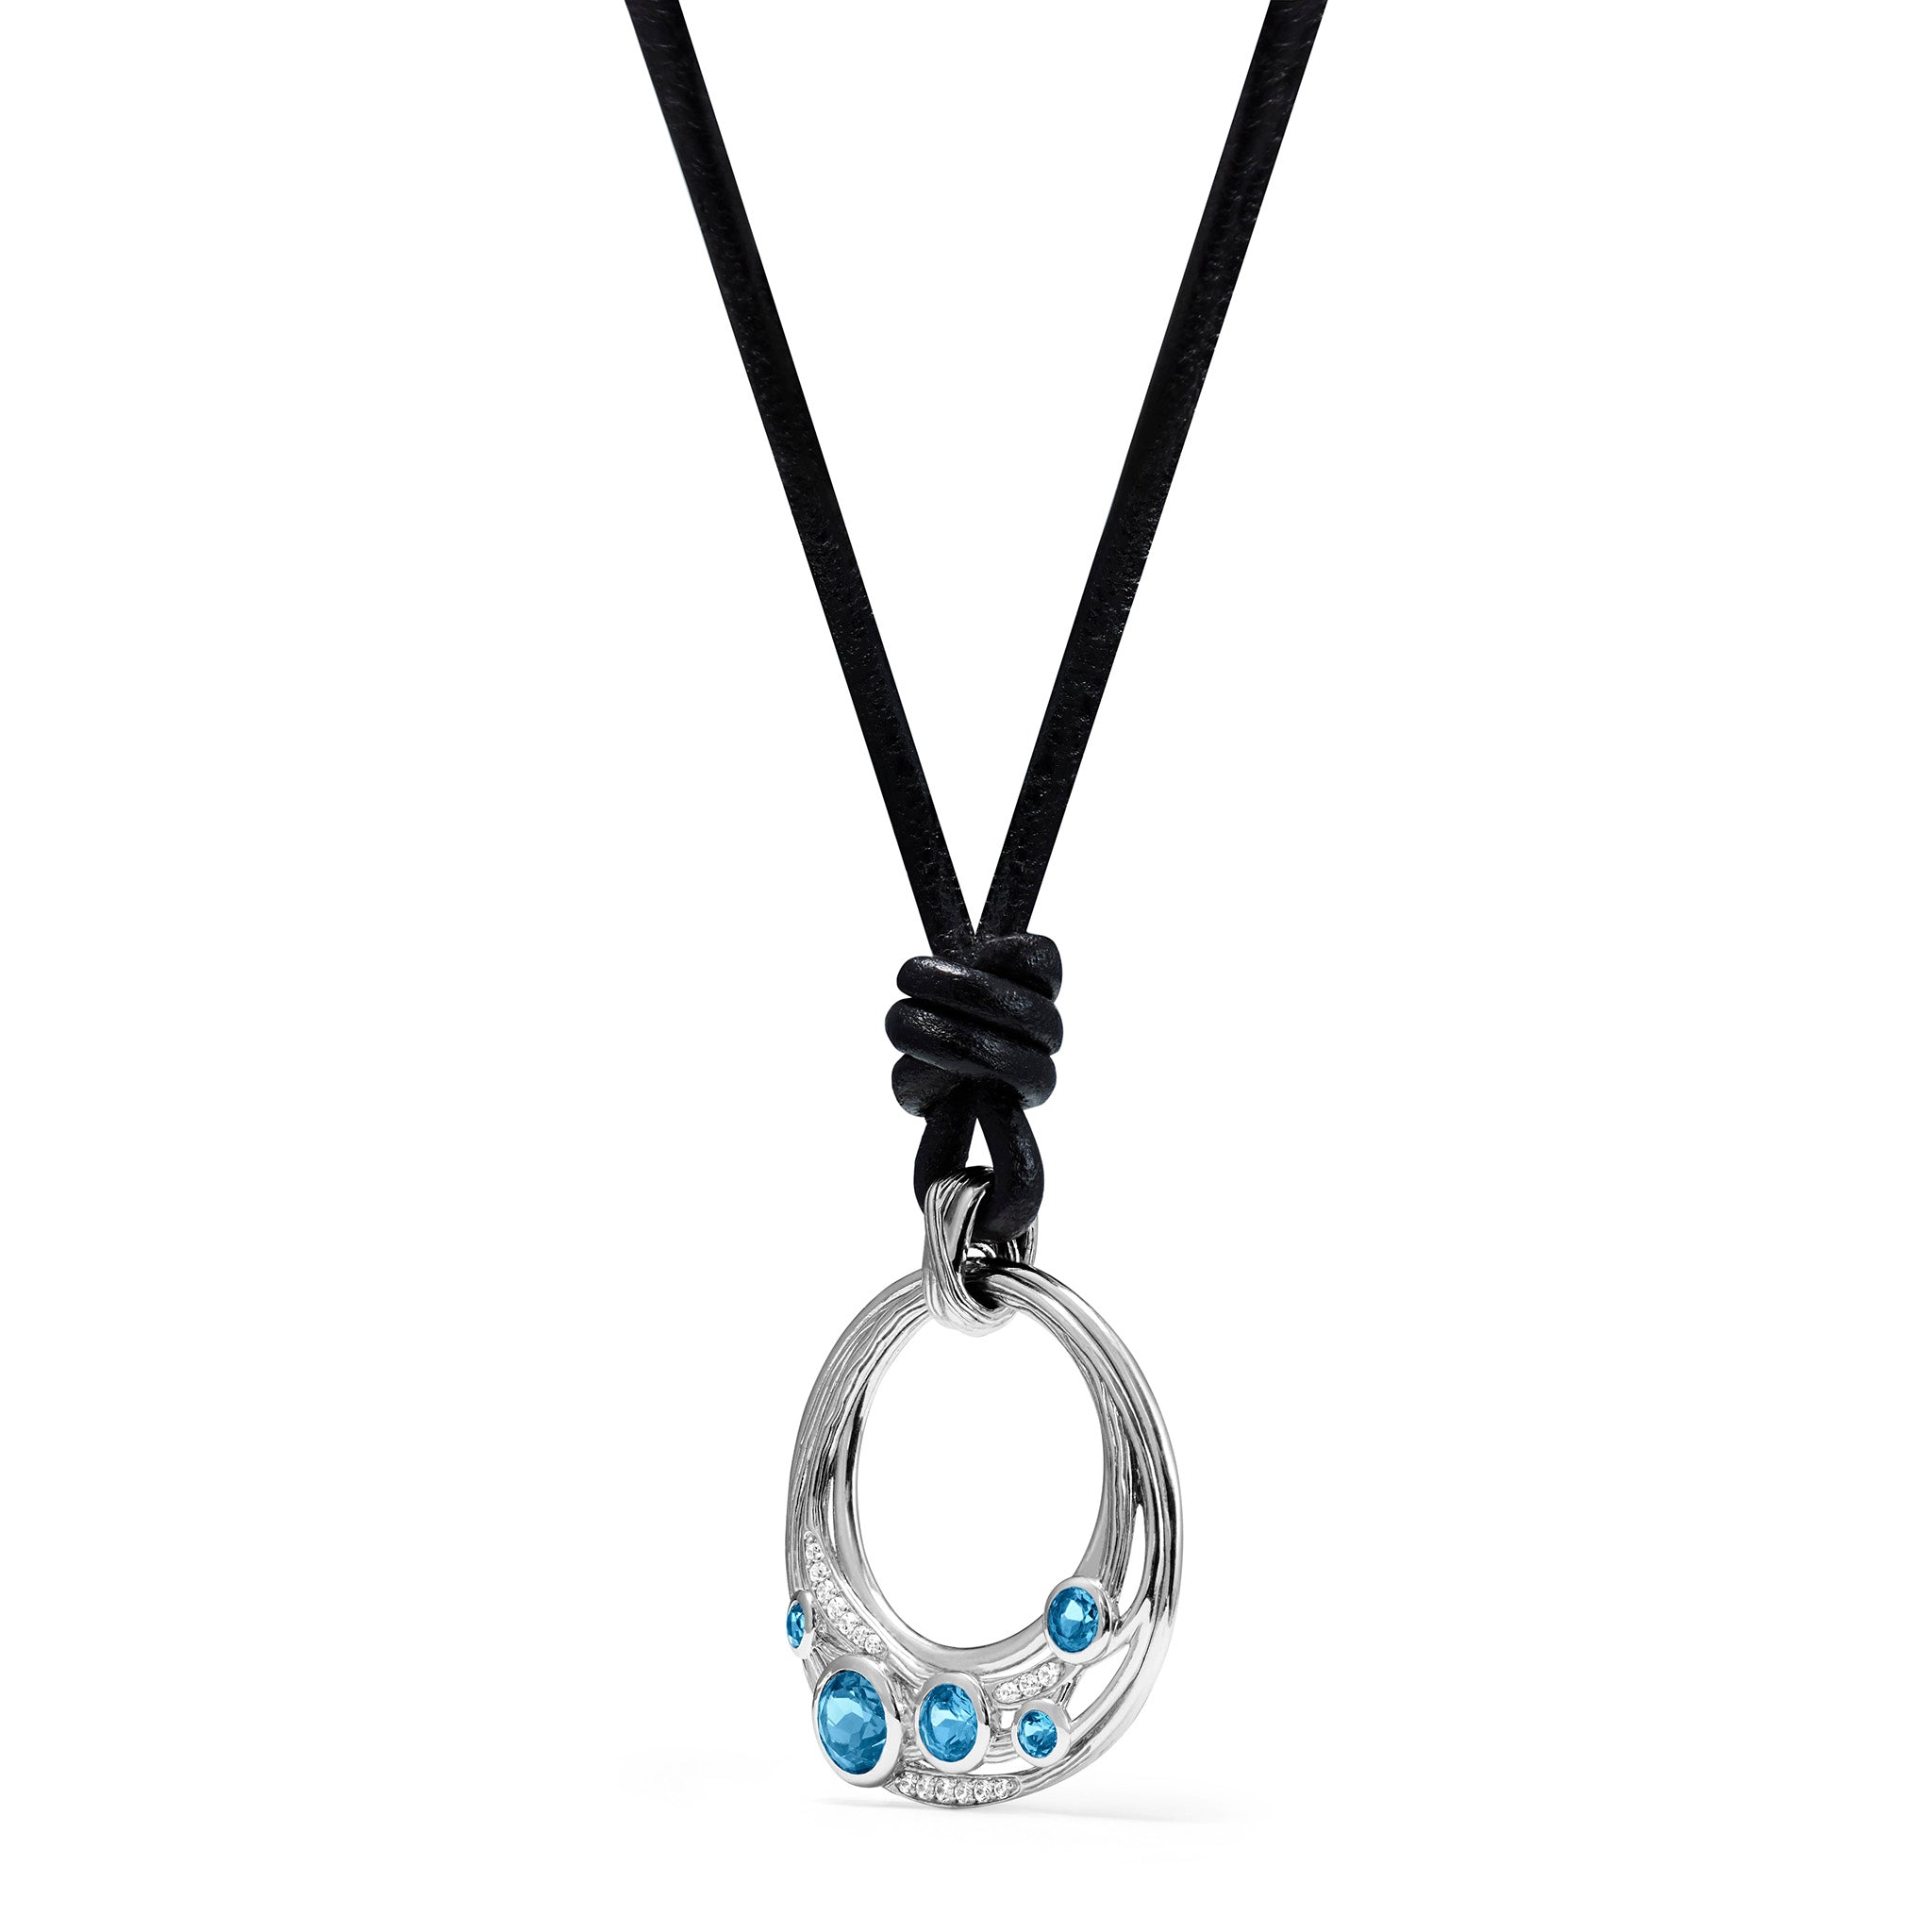 Santorini Long Black Leather Cord Necklace with London Blue Topaz and Diamonds